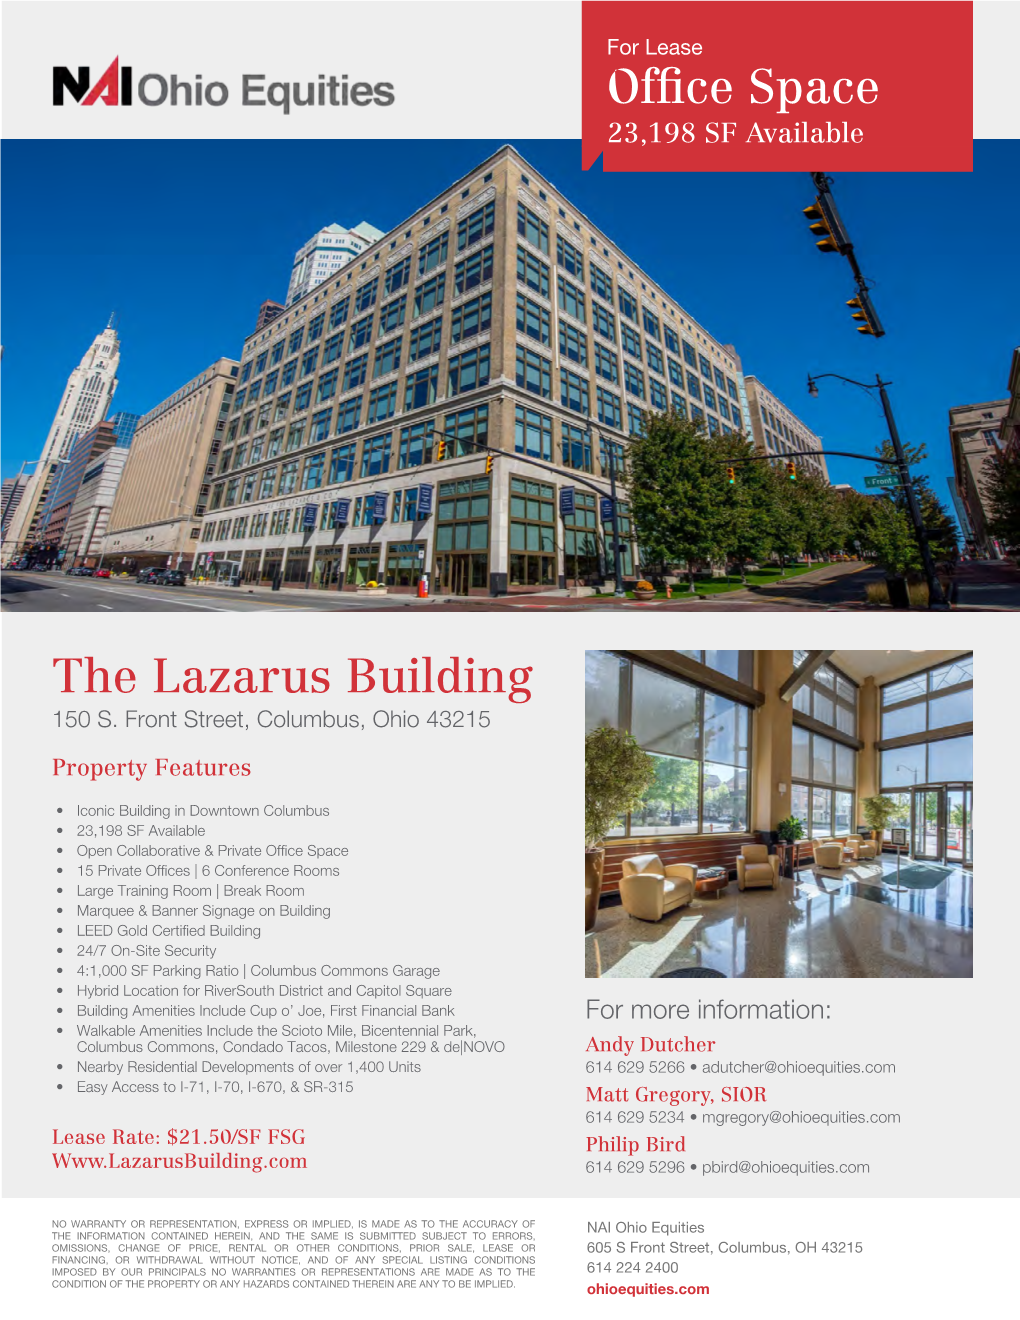 The Lazarus Building Office Space